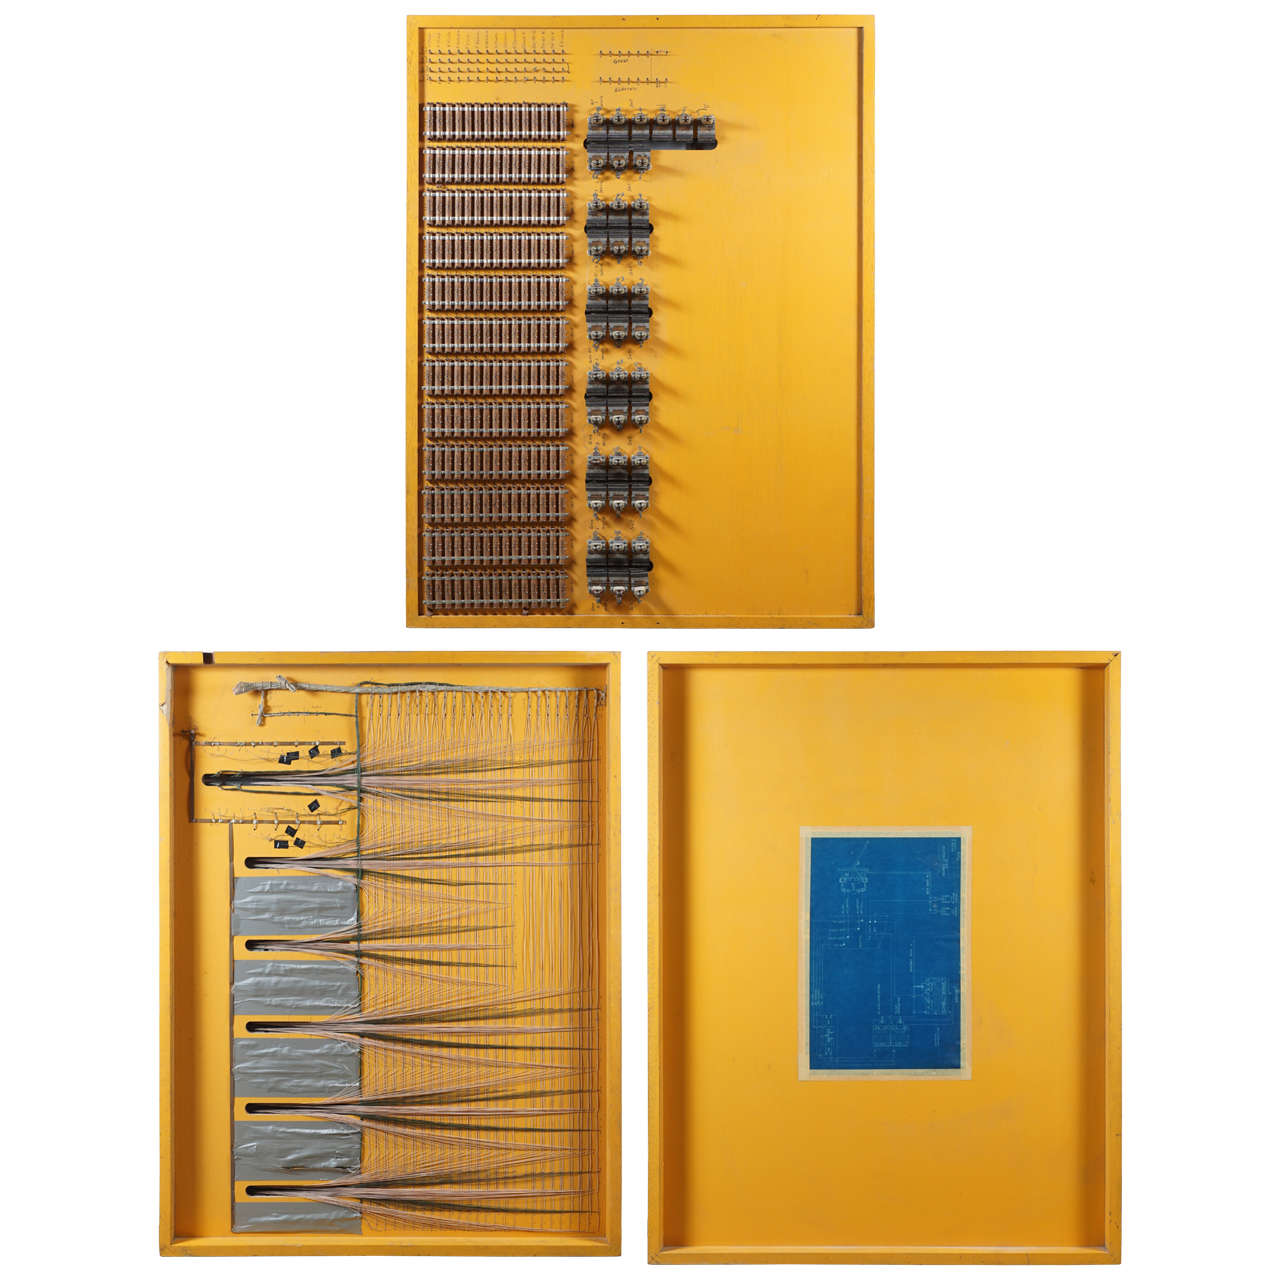 Tryptic Circuitry Board of a Church Organ, circa 1930 For Sale